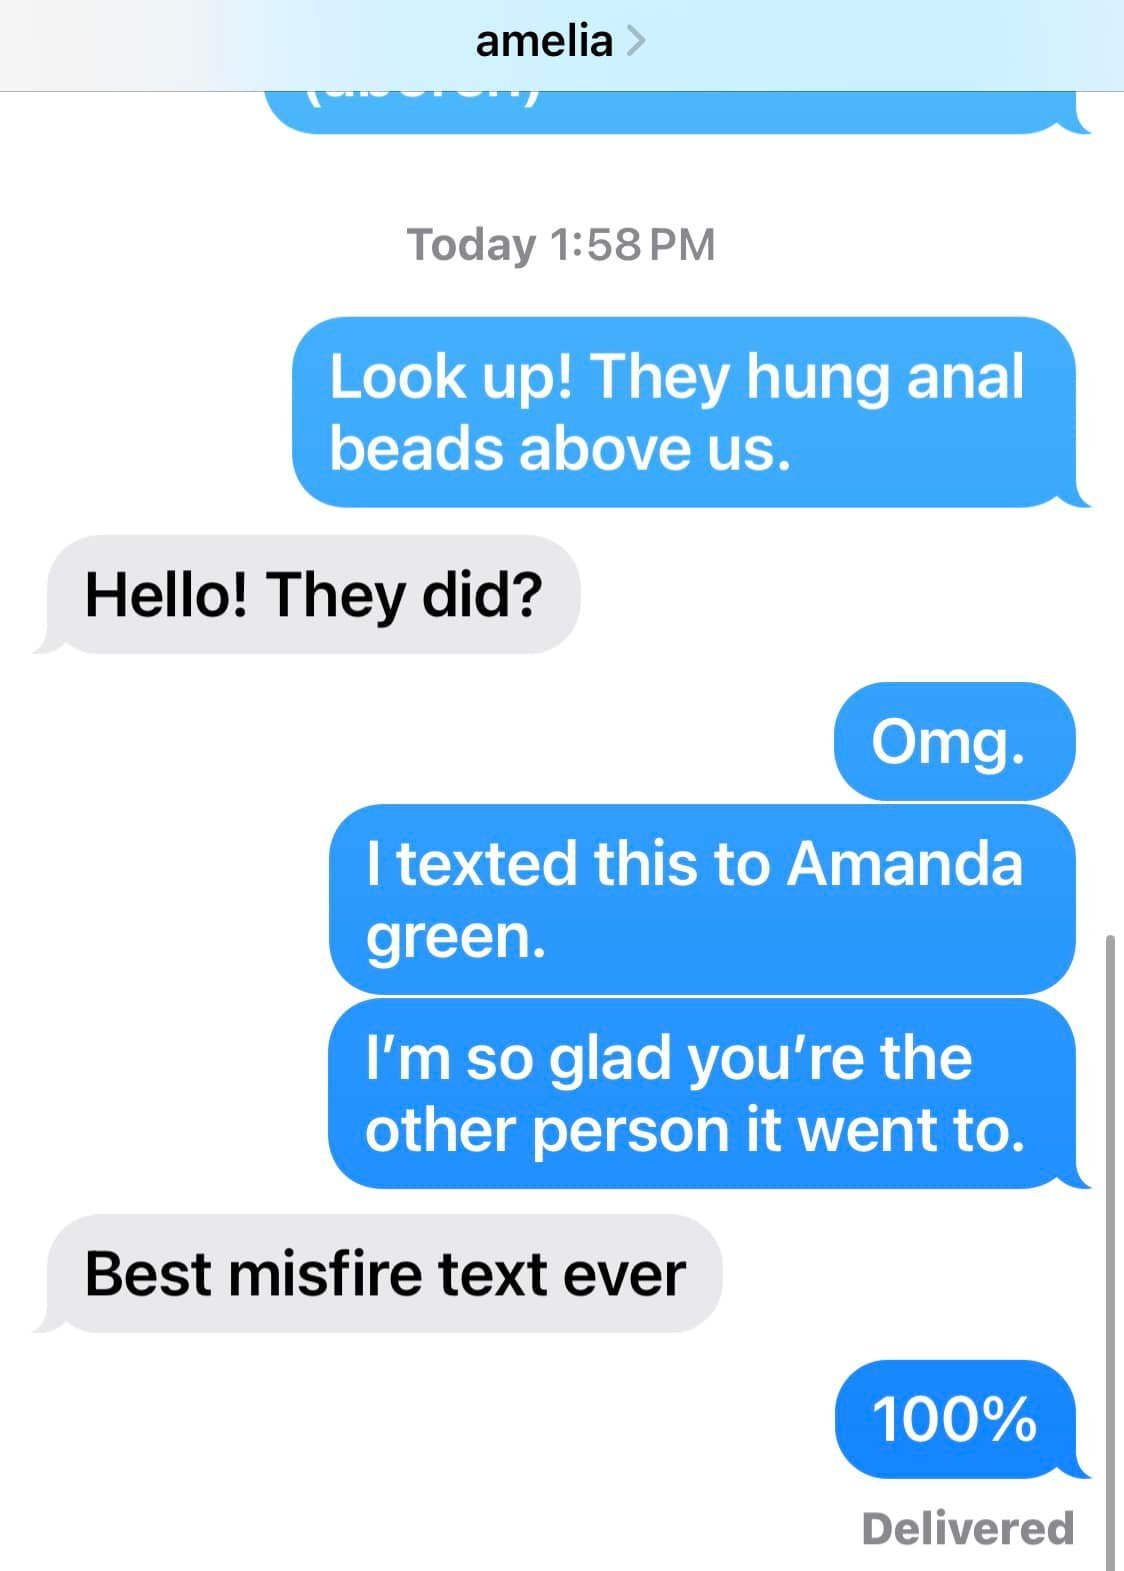 Oh mary! I sent the right text to the wrong person. And ooh was it a perfect mistake. 
1) the text i meant to send to Amanda Green about 
2) the ceiling beads and 
3) unrelatedly except we were all together, a snap of my newly beloved Freedome Bradle